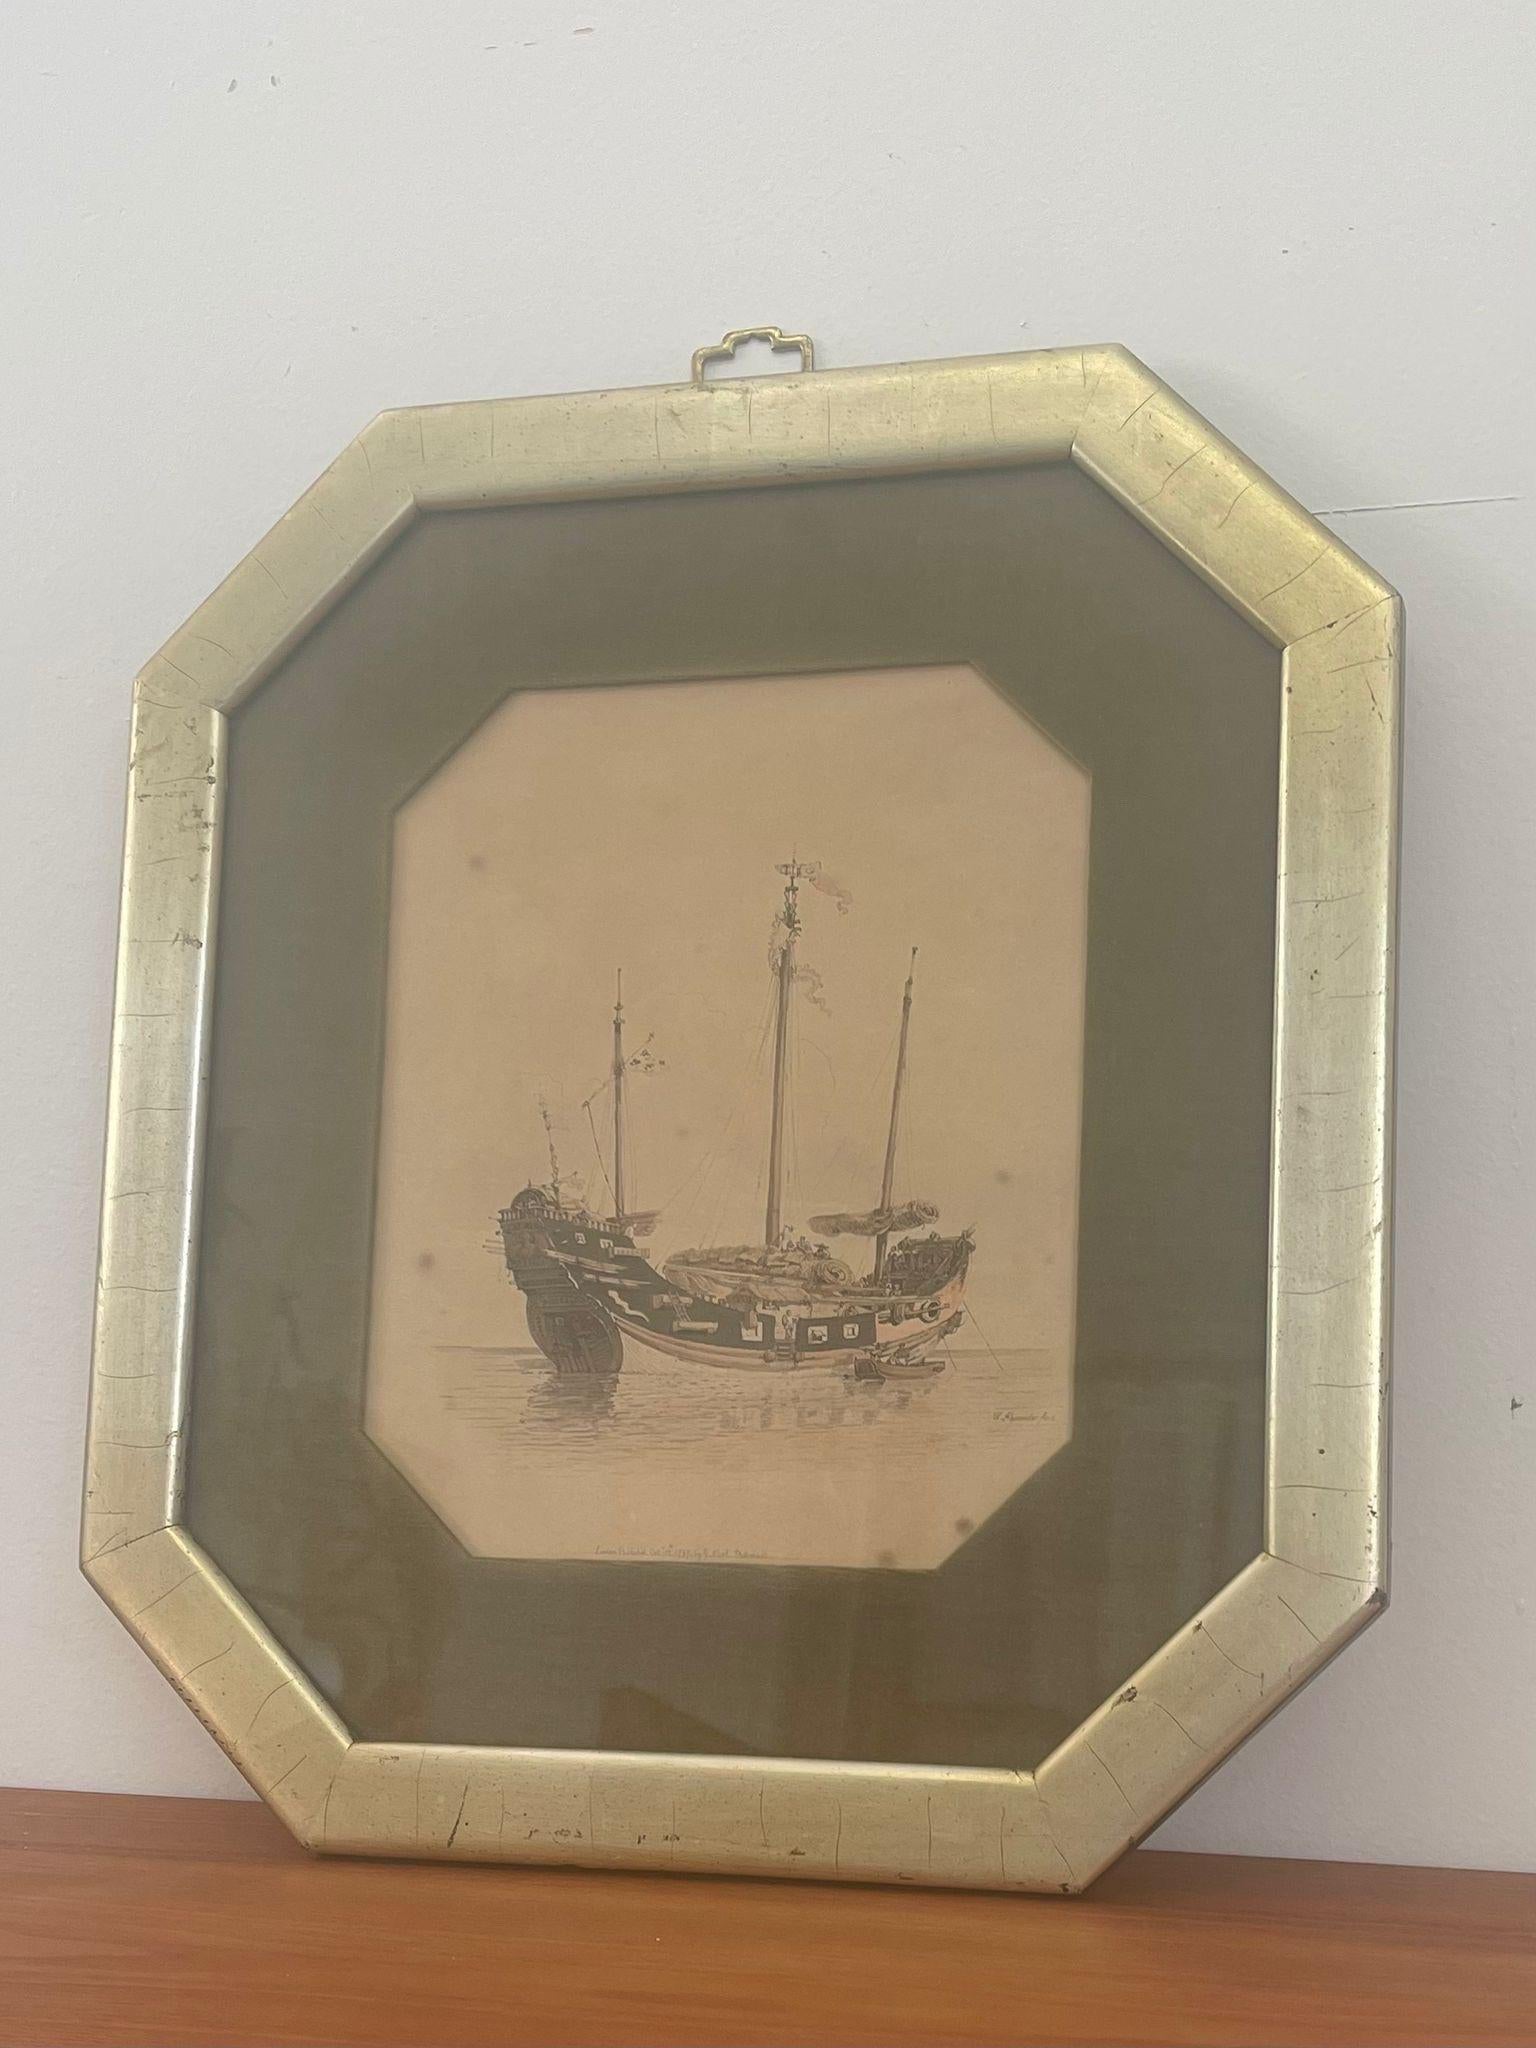 Gold Toned Frame. Titled and Signed on the Bottom. The Back of the Frame has Photograph Detailing the History of the Boat. Vintage Condition Consistent with Age as Pictured.

Dimensions. 16 W ; 1/2 D ; 18 H